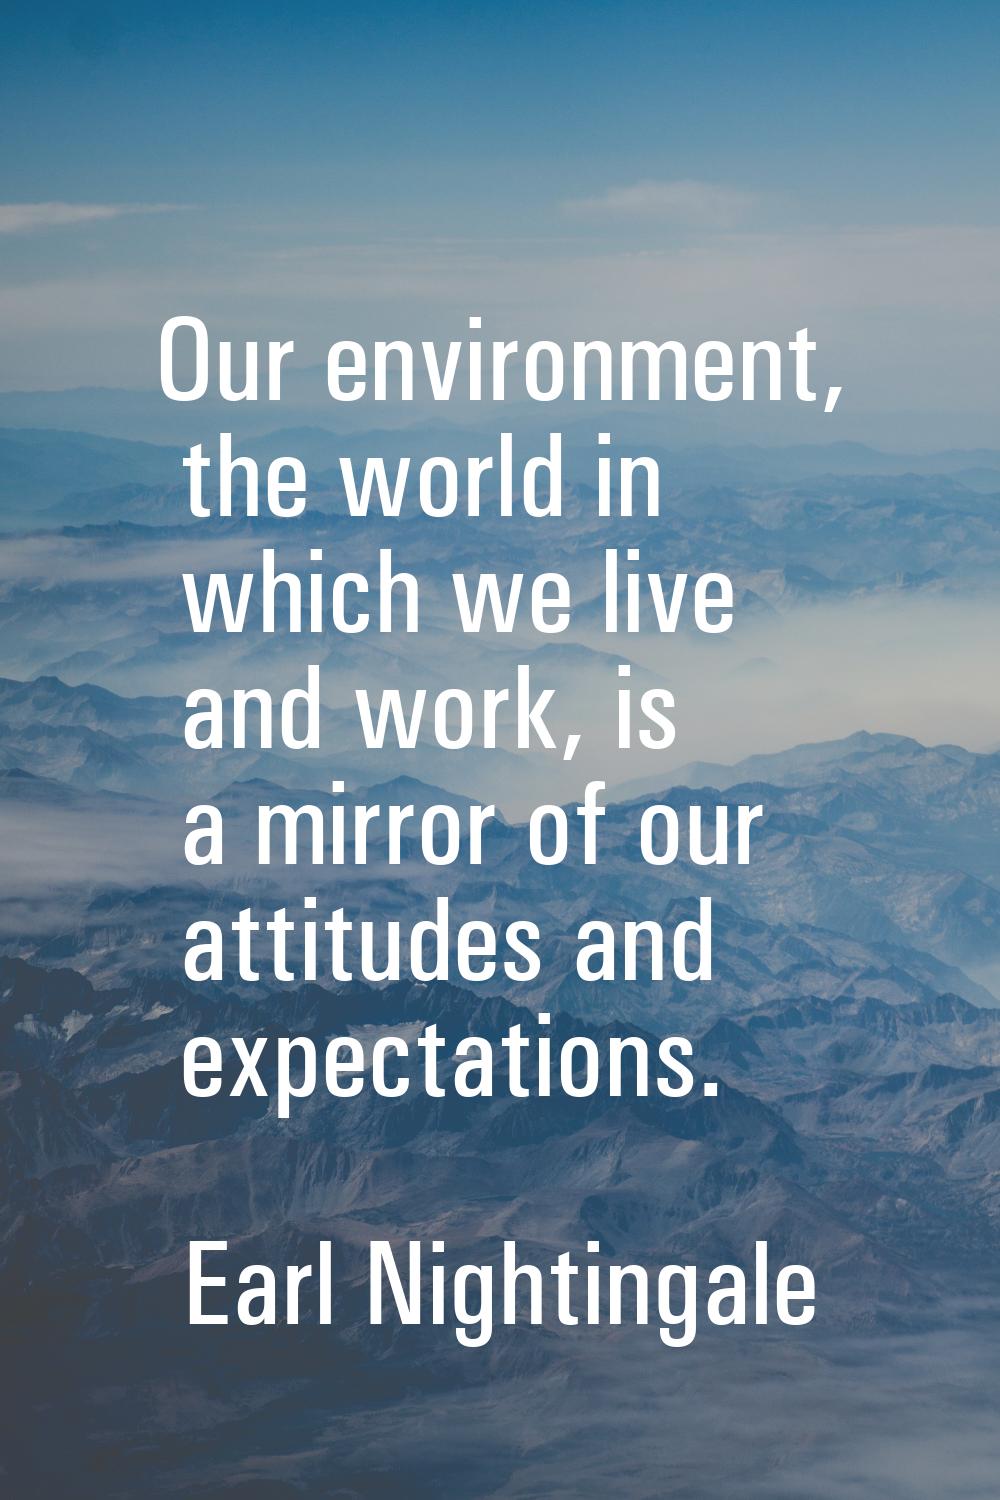 Our environment, the world in which we live and work, is a mirror of our attitudes and expectations